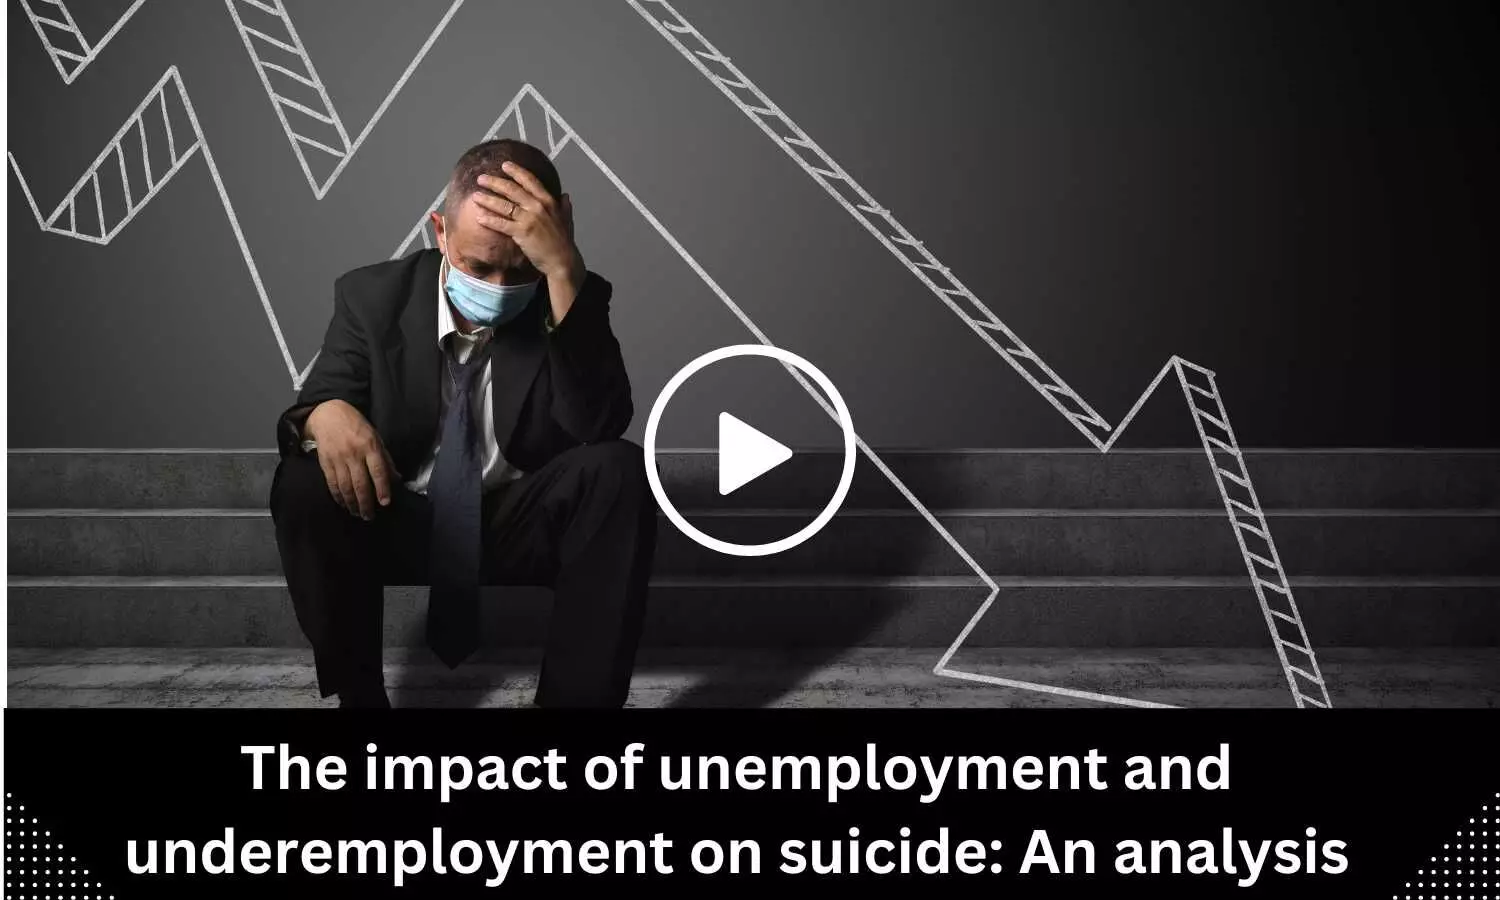 The impact of unemployment and underemployment on suicide: An analysis